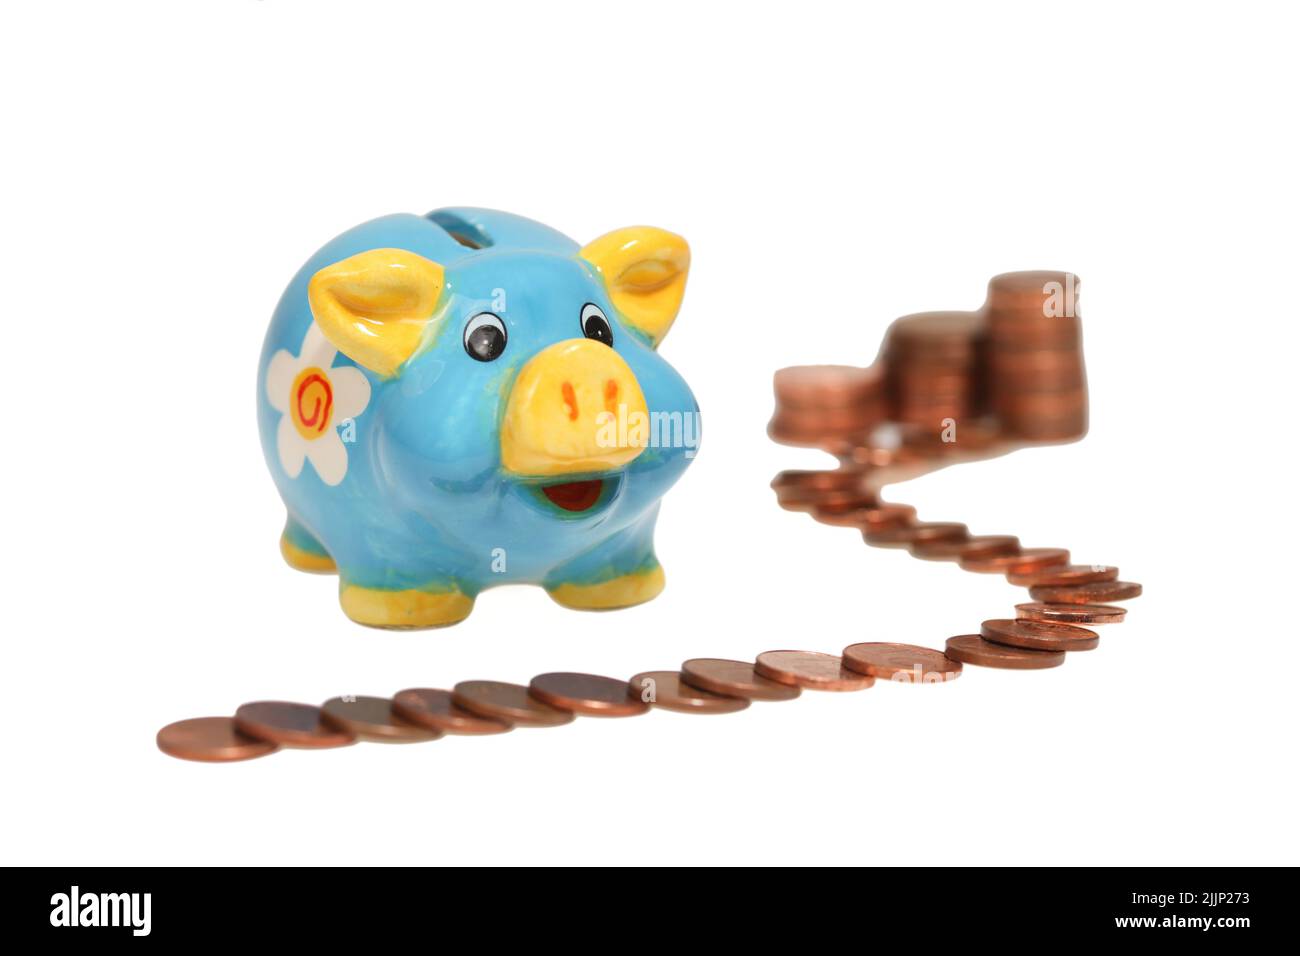 A lucky piggy bank with coins on a white background. Concept: Saving money Stock Photo